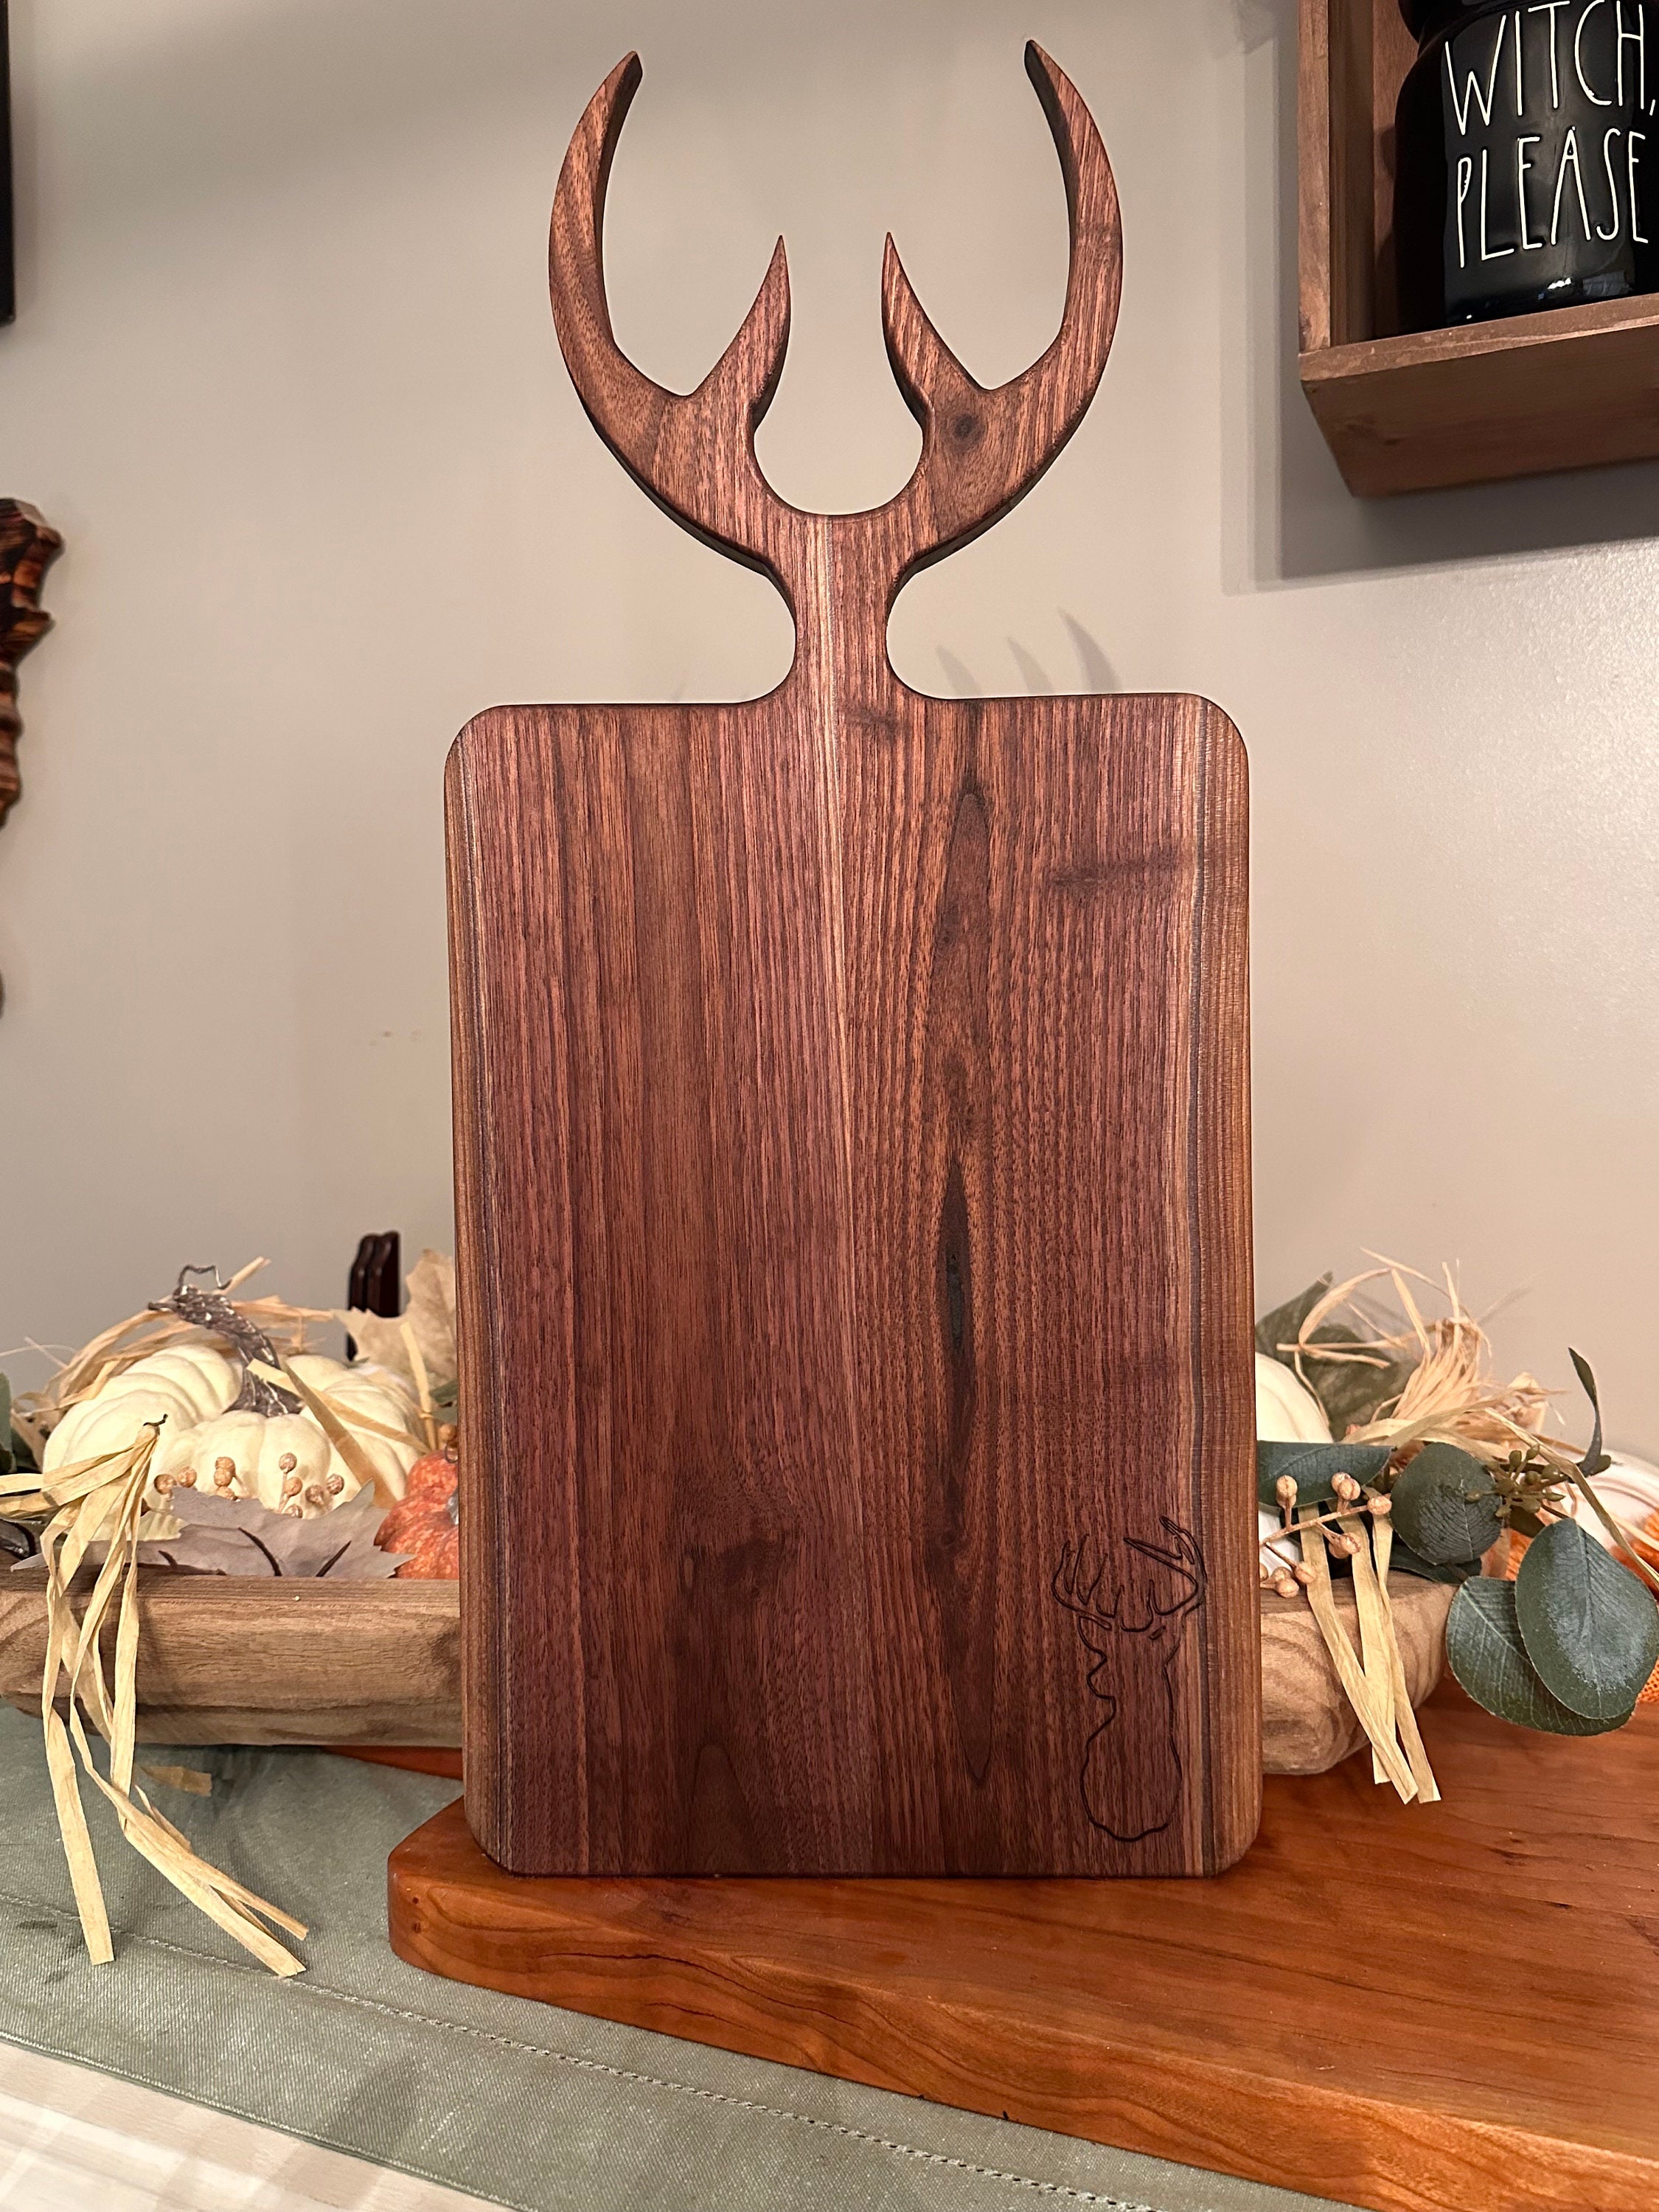 Large Wooden Cutting Board With Reindeer Antlers. Cutting Board. Serving  Board for Meat. Big Cutting Board. Housewarming Gift. Mothers Day 